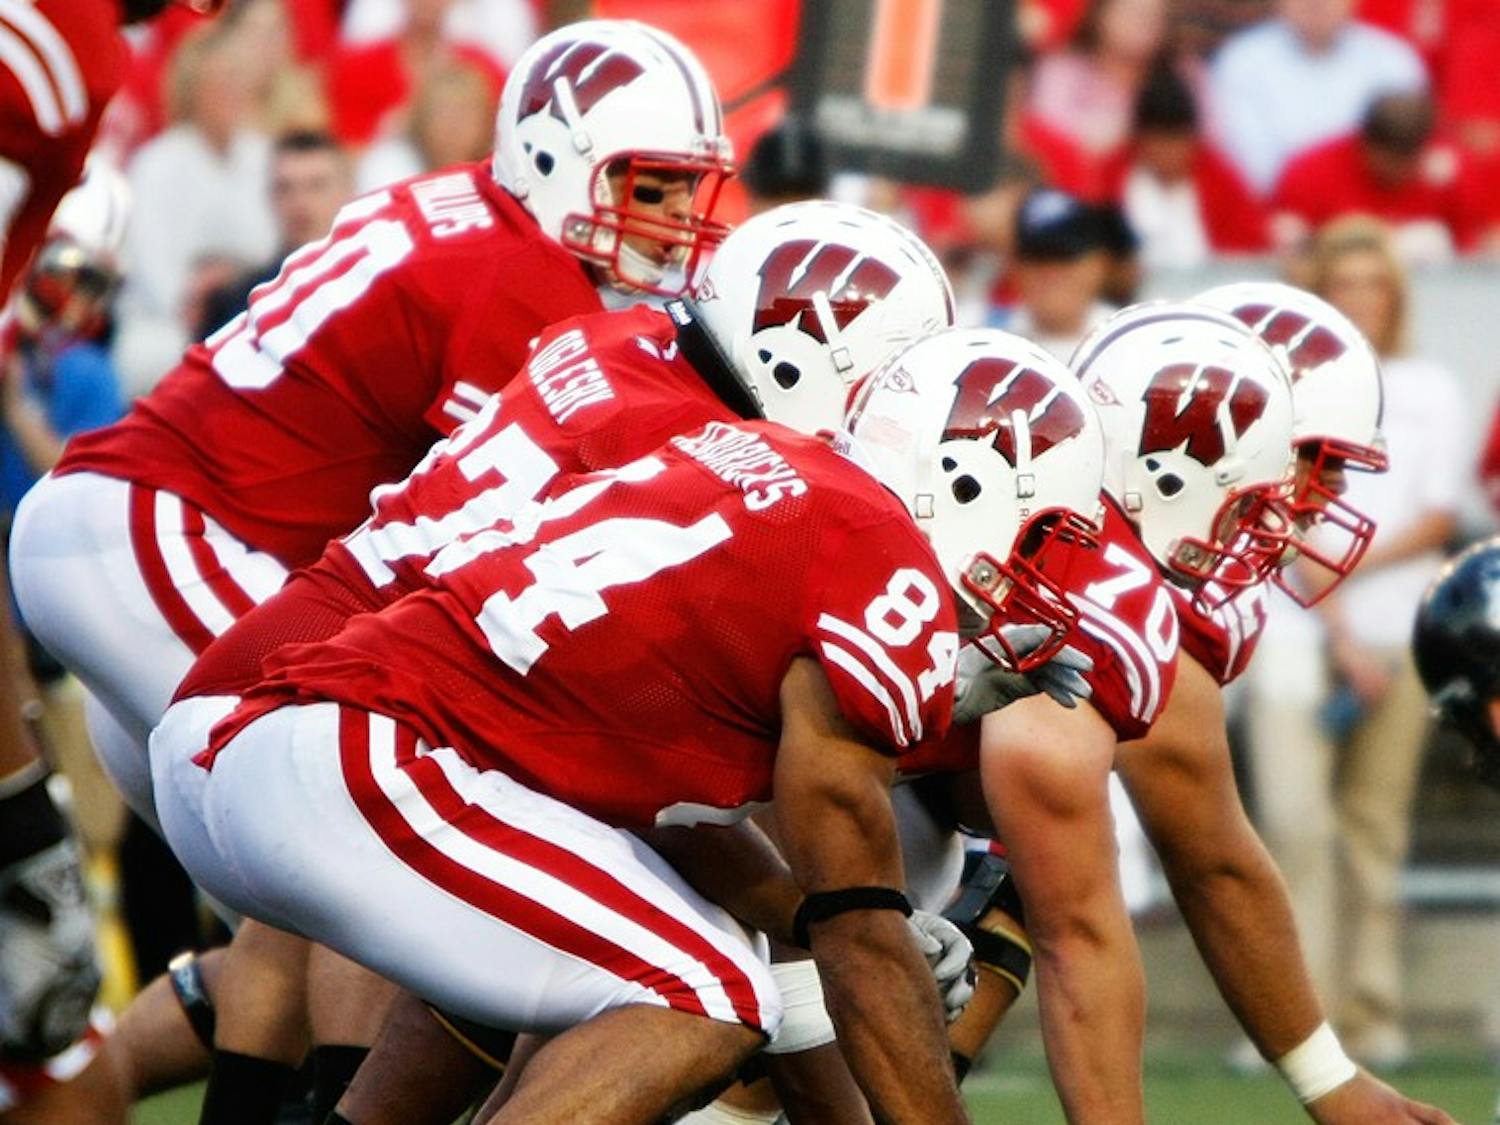 Badgers use new style for same approach